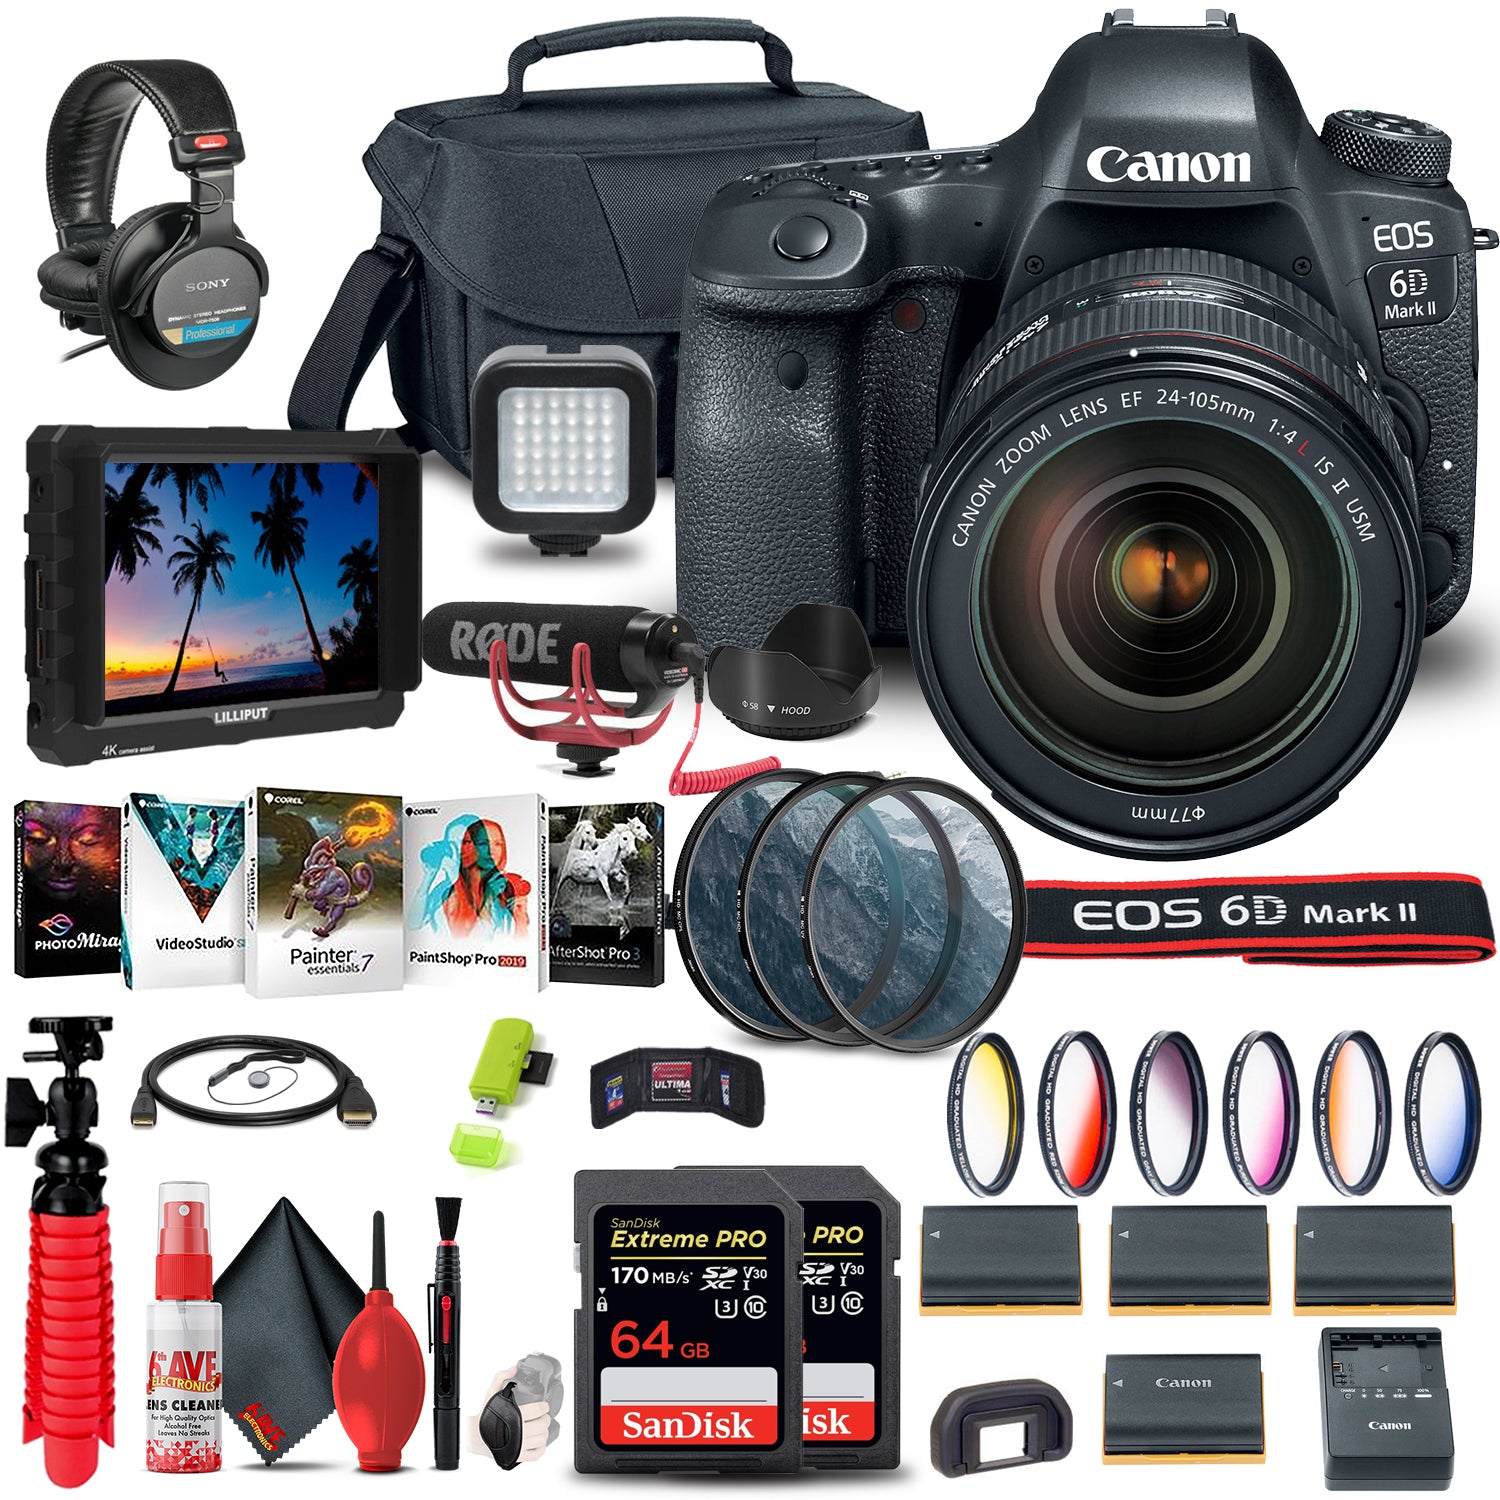 Canon EOS 6D Mark II Camera with 24-105mm f/4L II Lens (1897C009) Video Monitor Bundle